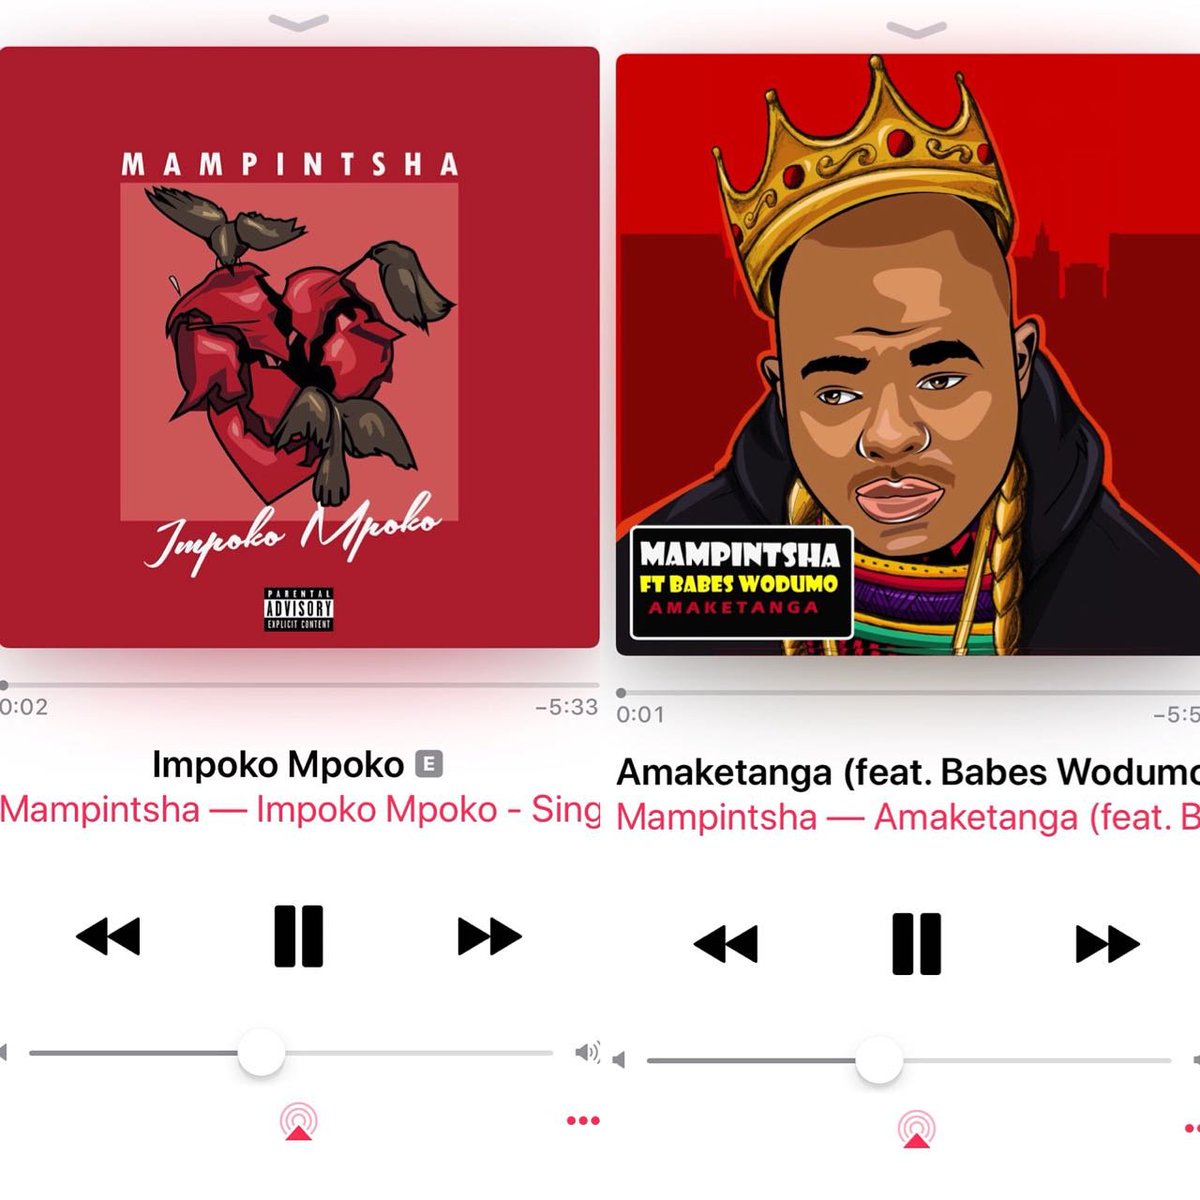 HIGHLY GRATEFUL for the love & Support my People! We Getting closer to hitting Gold Status🙌🏾 please go Purchase my New Singles and help me Reach 40K downloads 📀#IMPOKOMPOKO | 📀#AMAKETANGA   🙏🏽❤🇿🇦 #DreamsNeverDie #Mampintsha #TheGentleDon #WestInkRecords